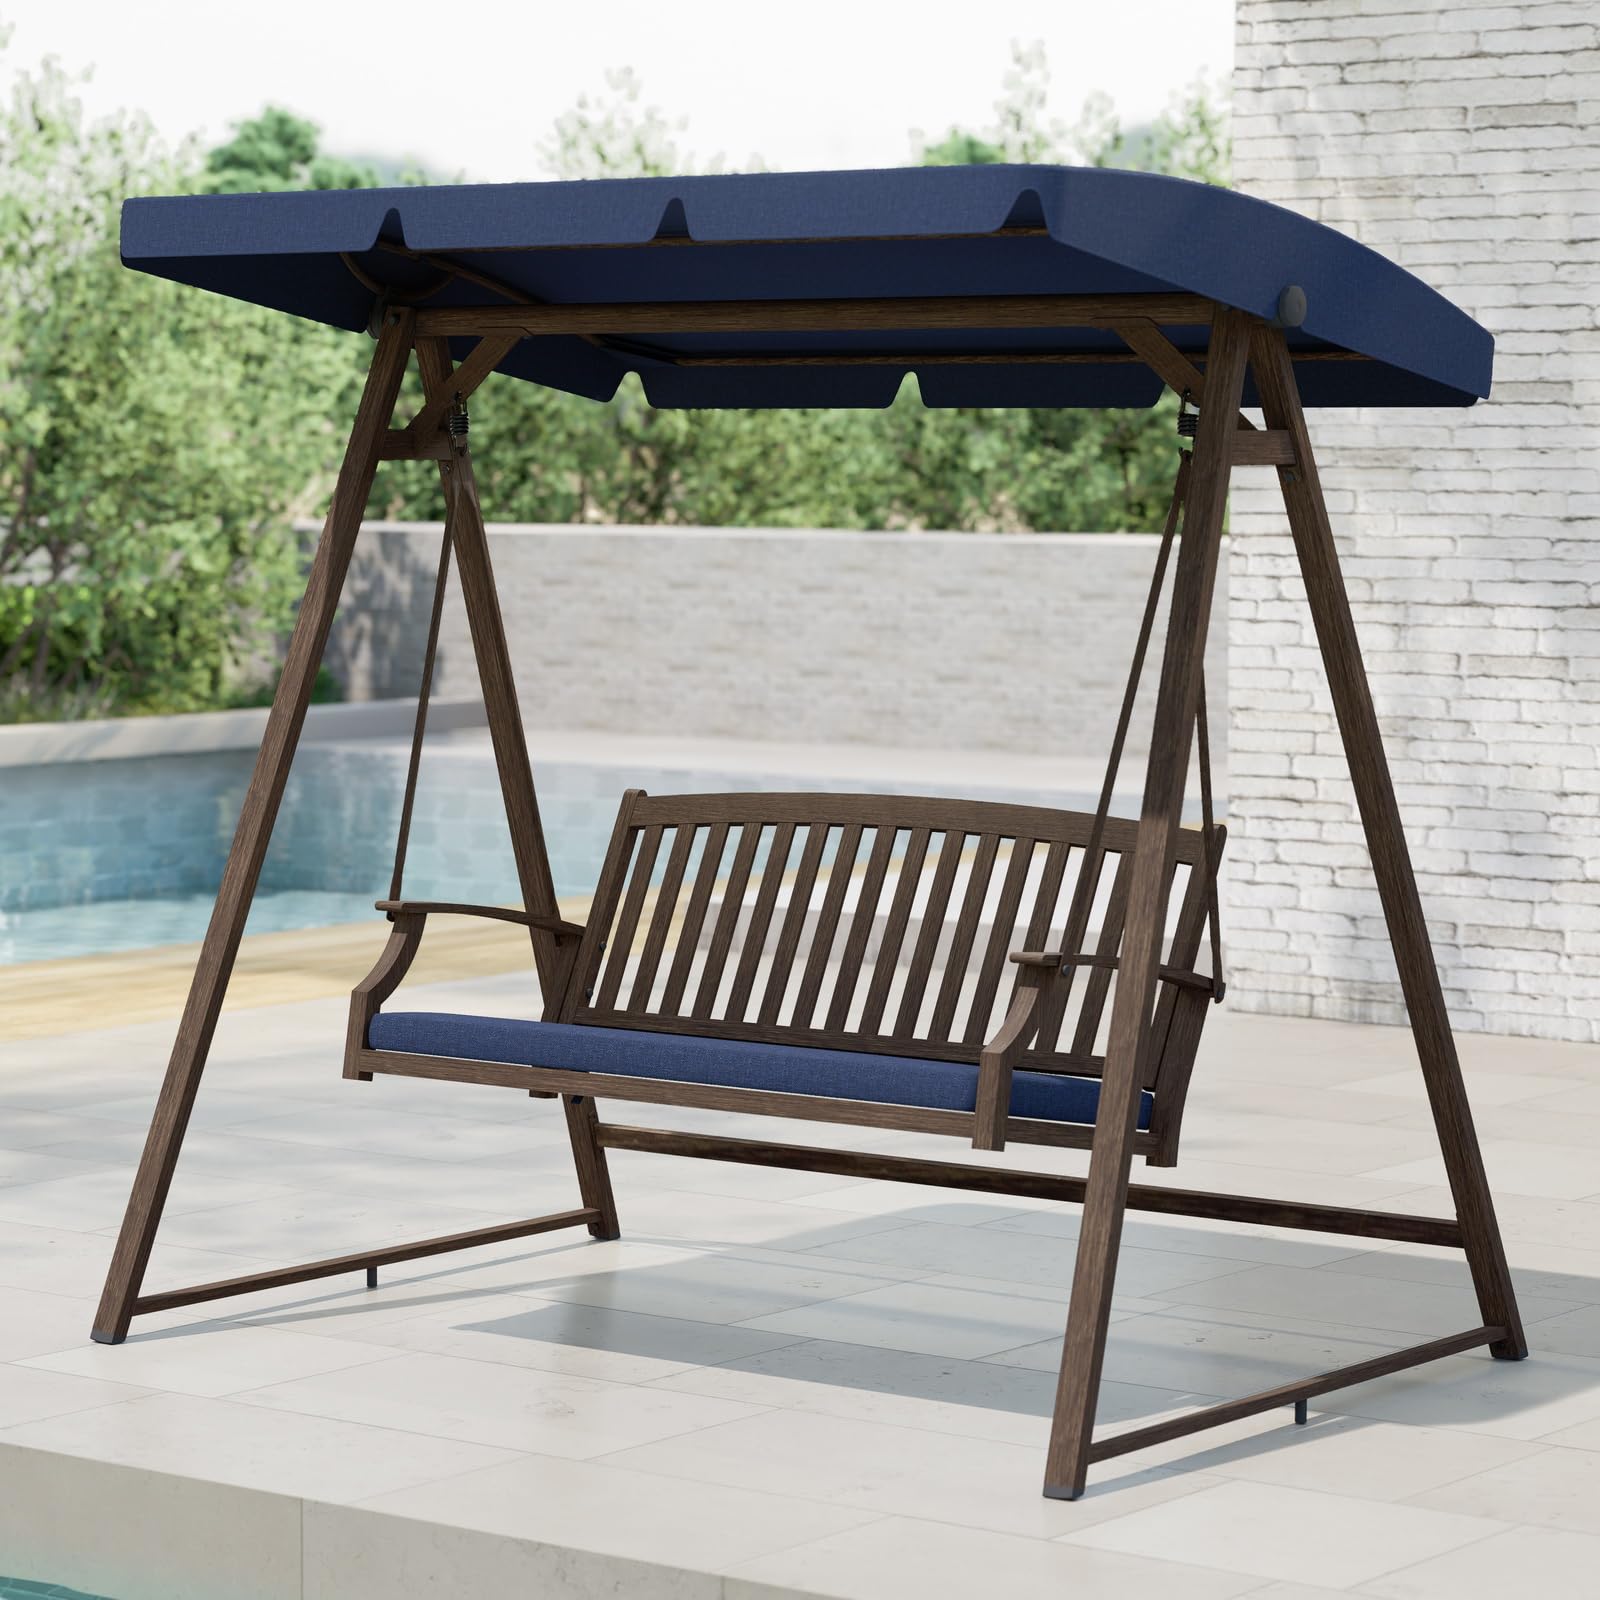 Outdoor 2-Seat Patio Swing Chair, Adjustable Tilt Canopy, with Removable Cushion, Weather Resistant Powder Coated Painted Woodgrain Frame